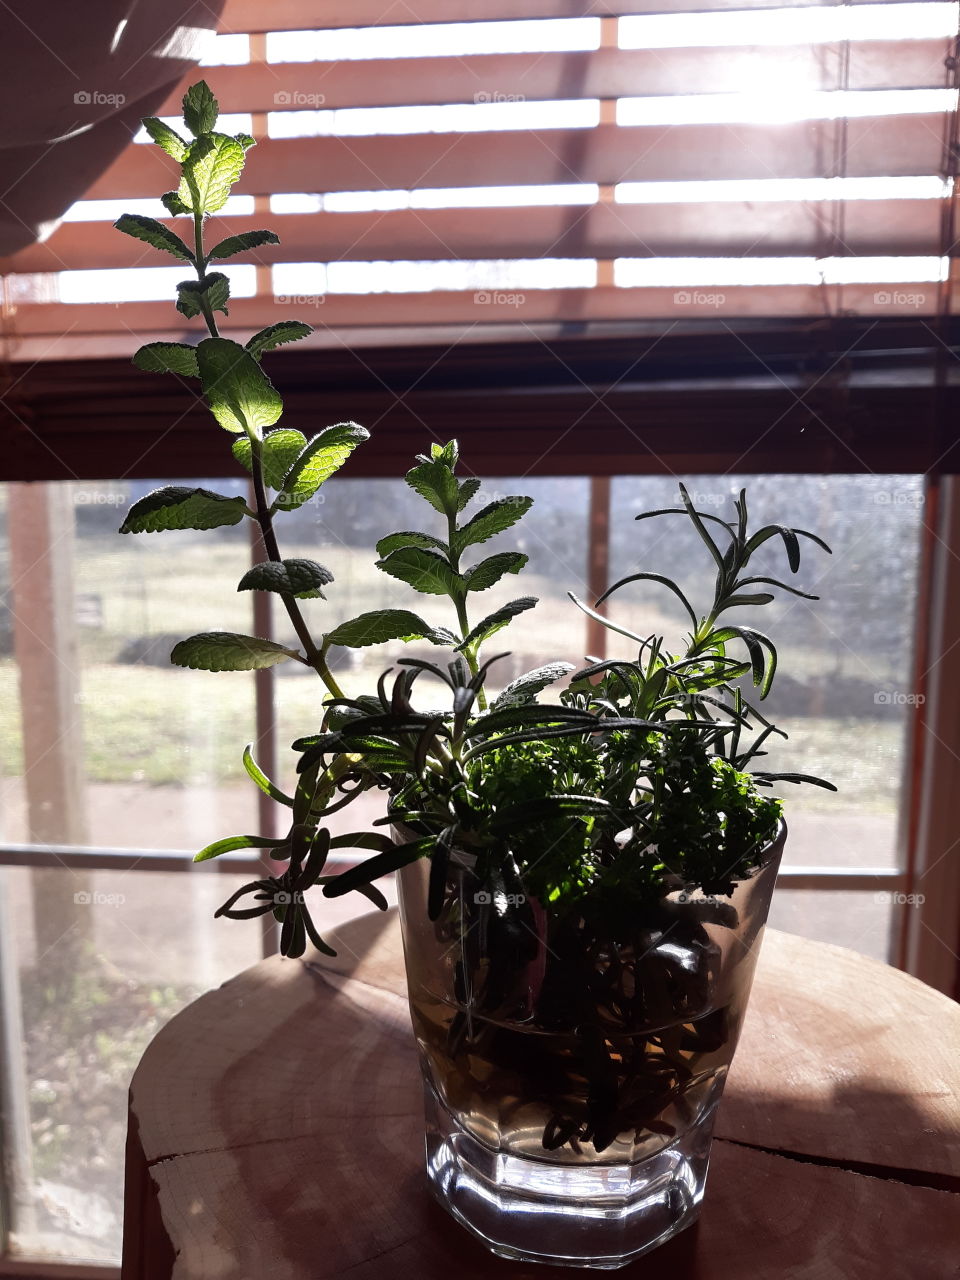 Herbs making roots in window